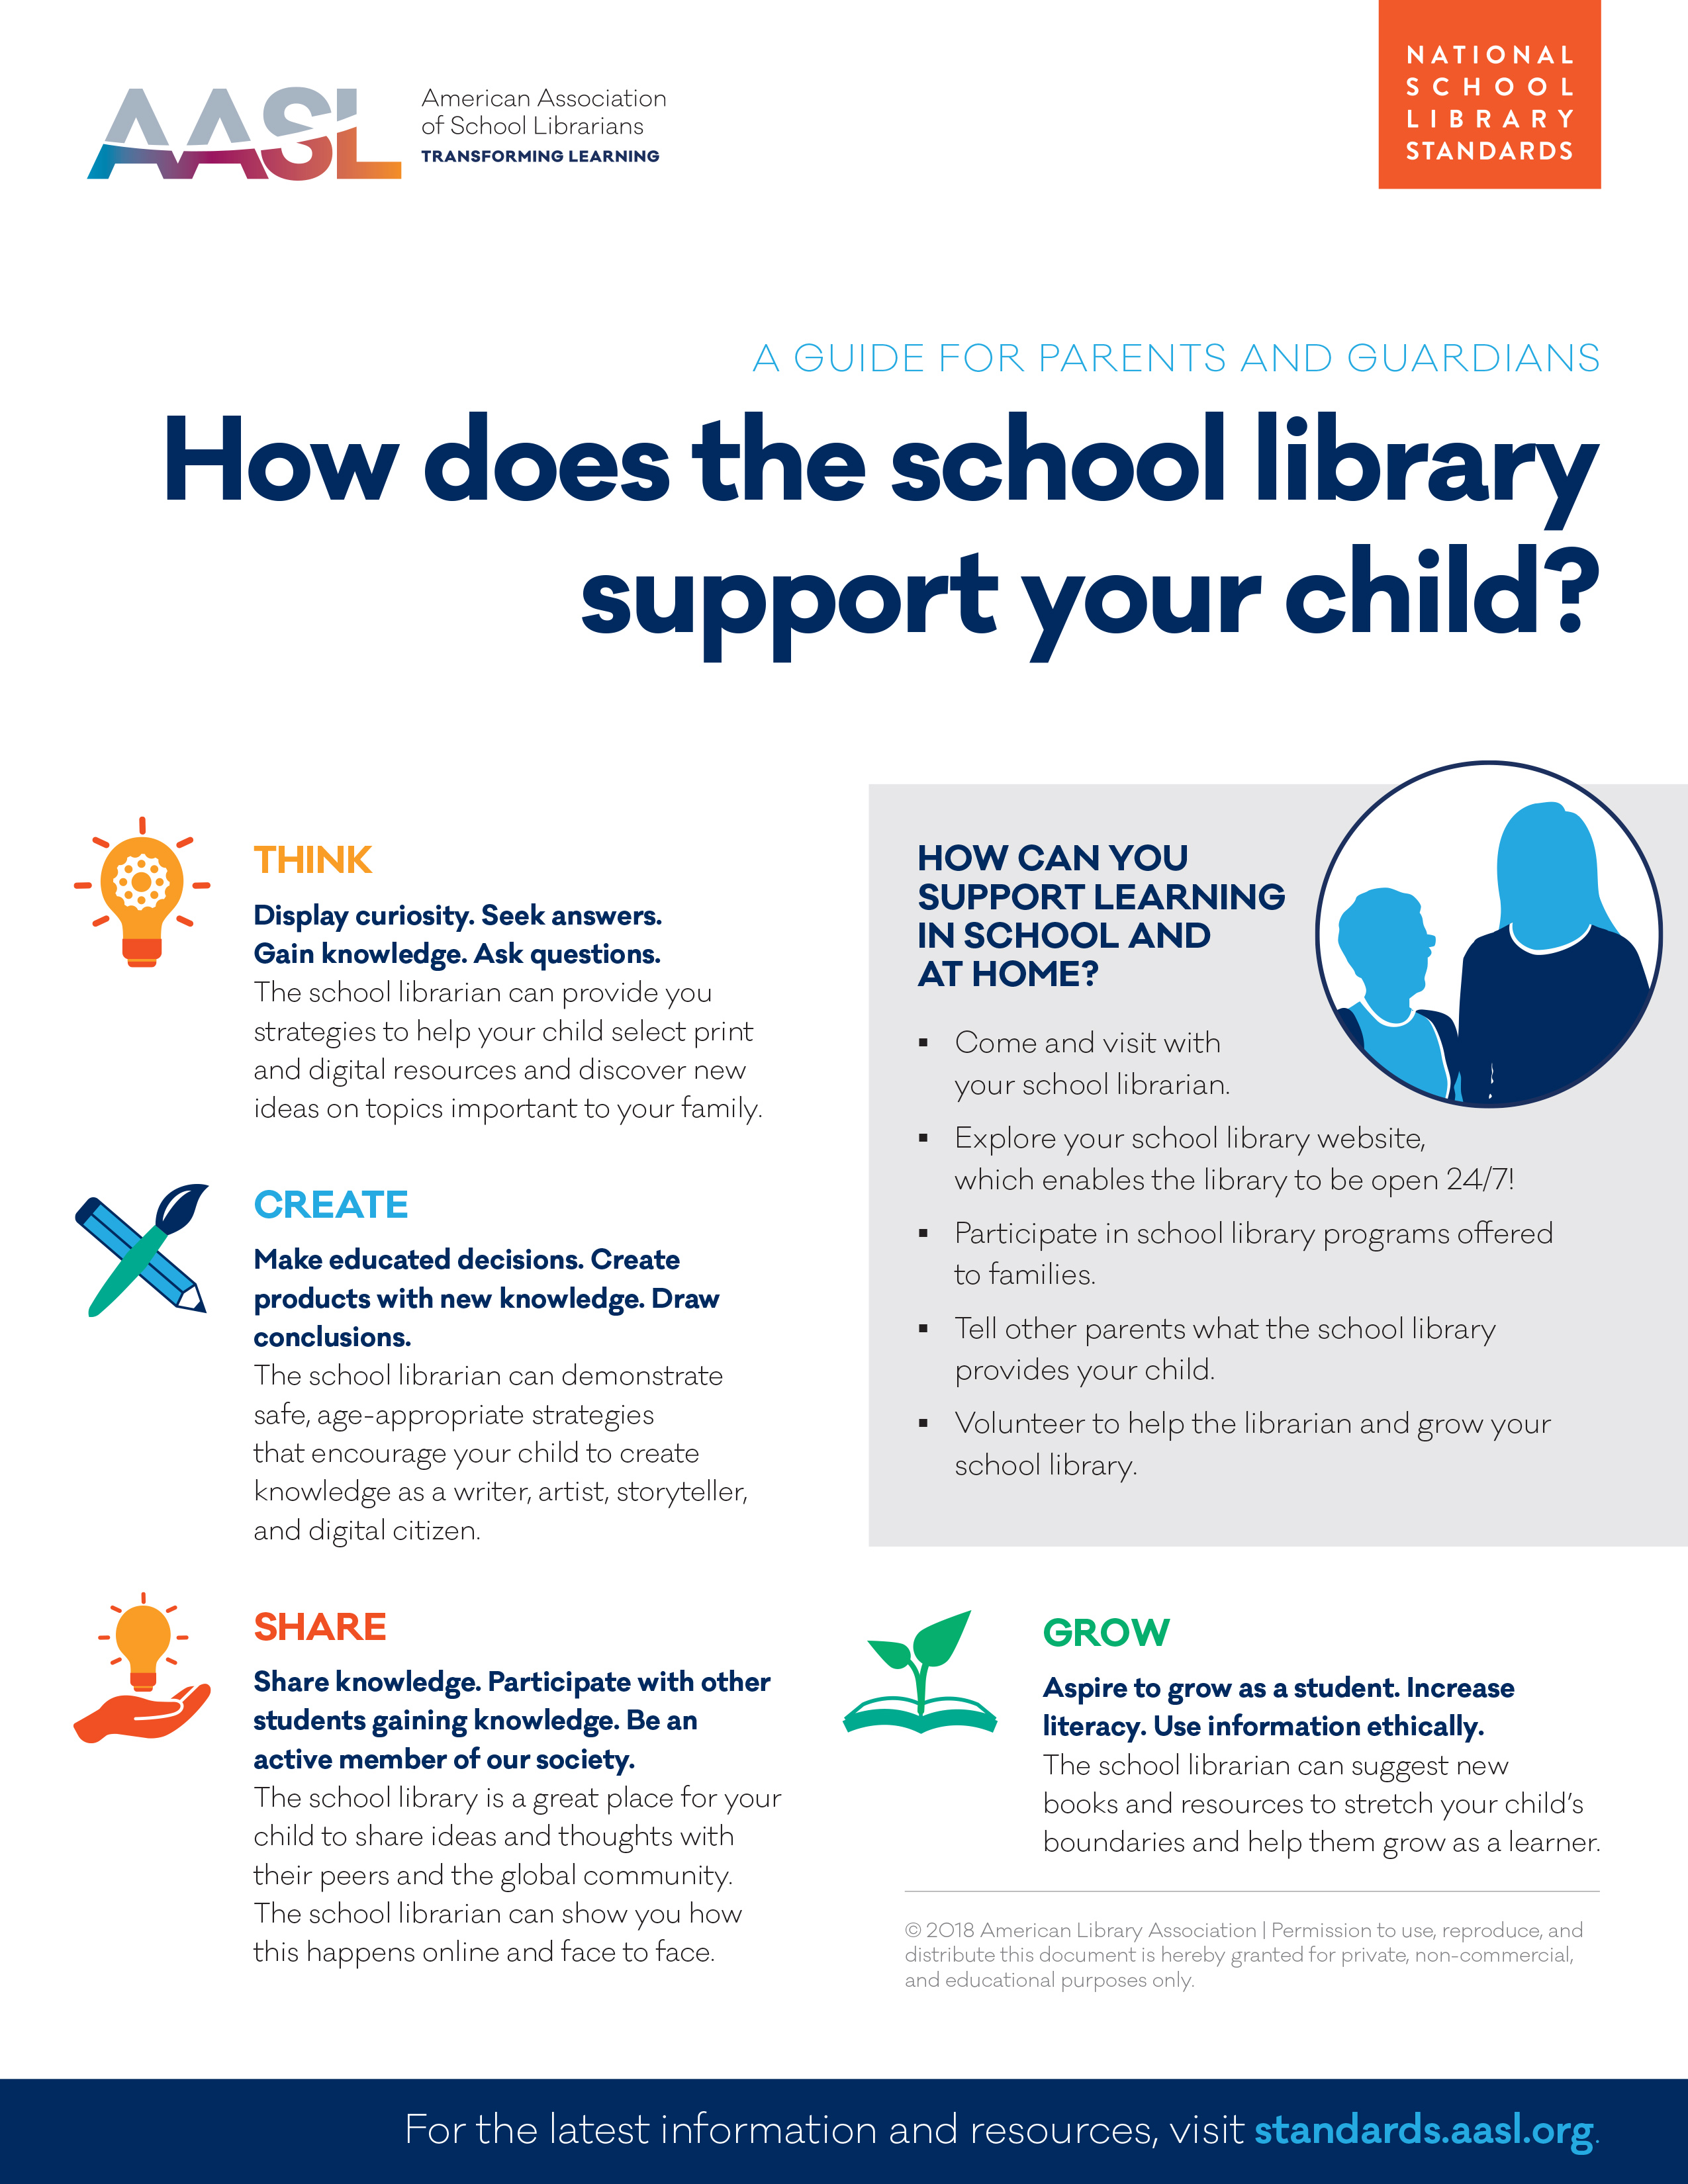 How does the school library support your child?